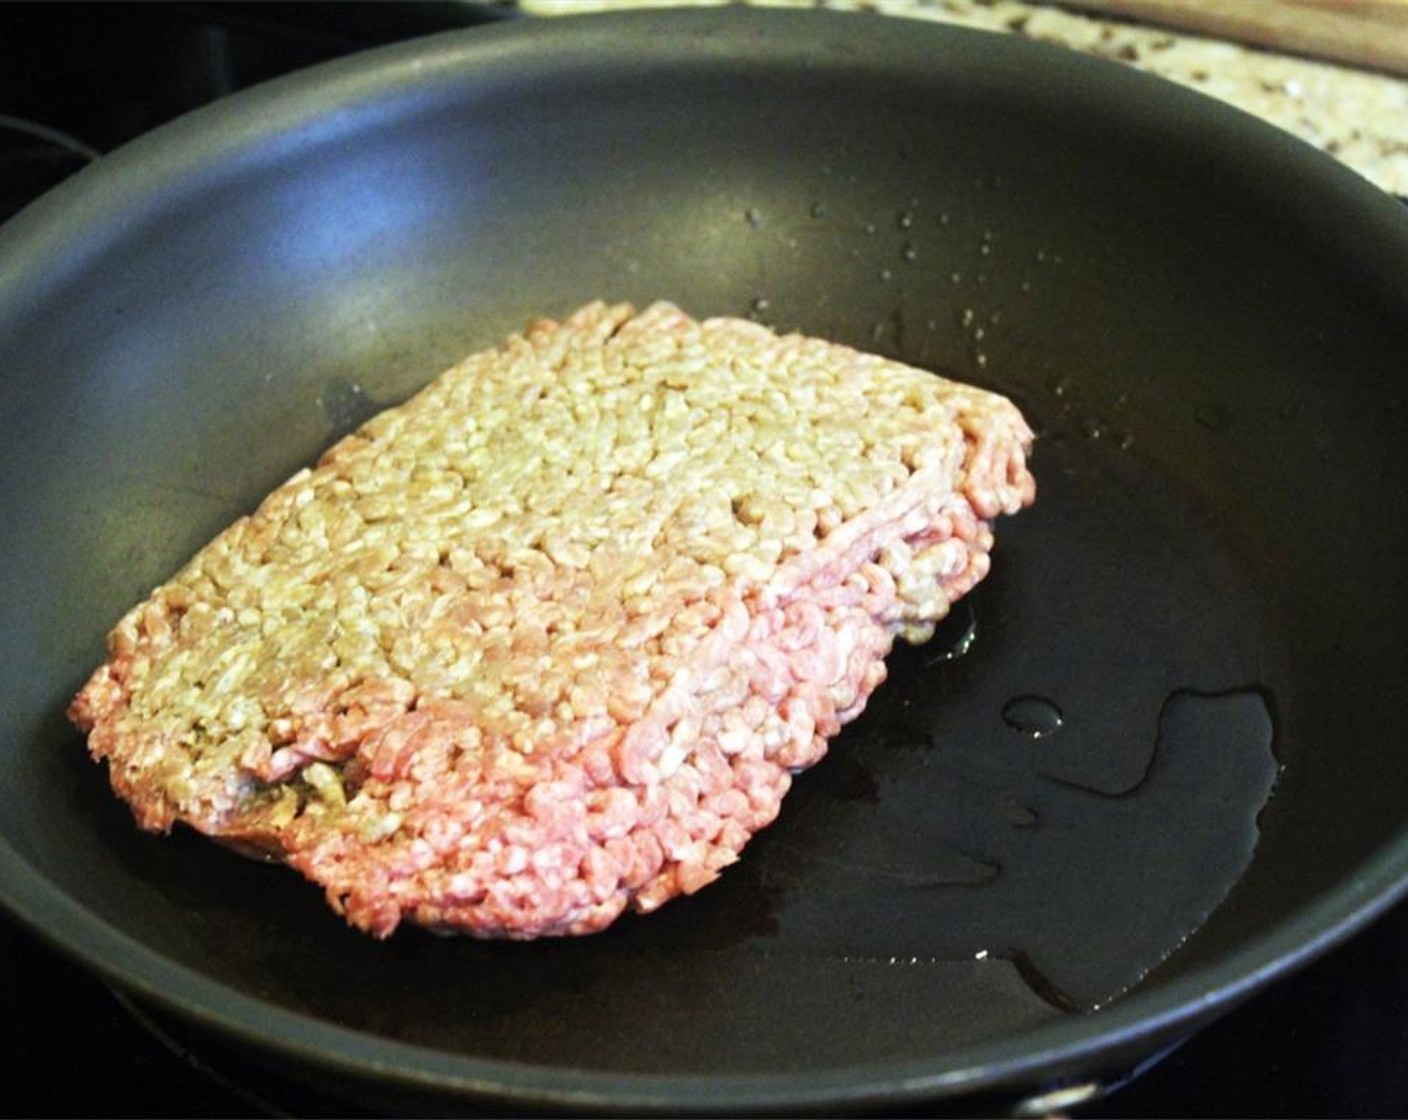 step 1 Heat a skillet to medium-high heat and add the Ground Beef (1 lb). Cook for 5 to 7 minutes, breaking up the meat up as it cooks until crumbly and browned.